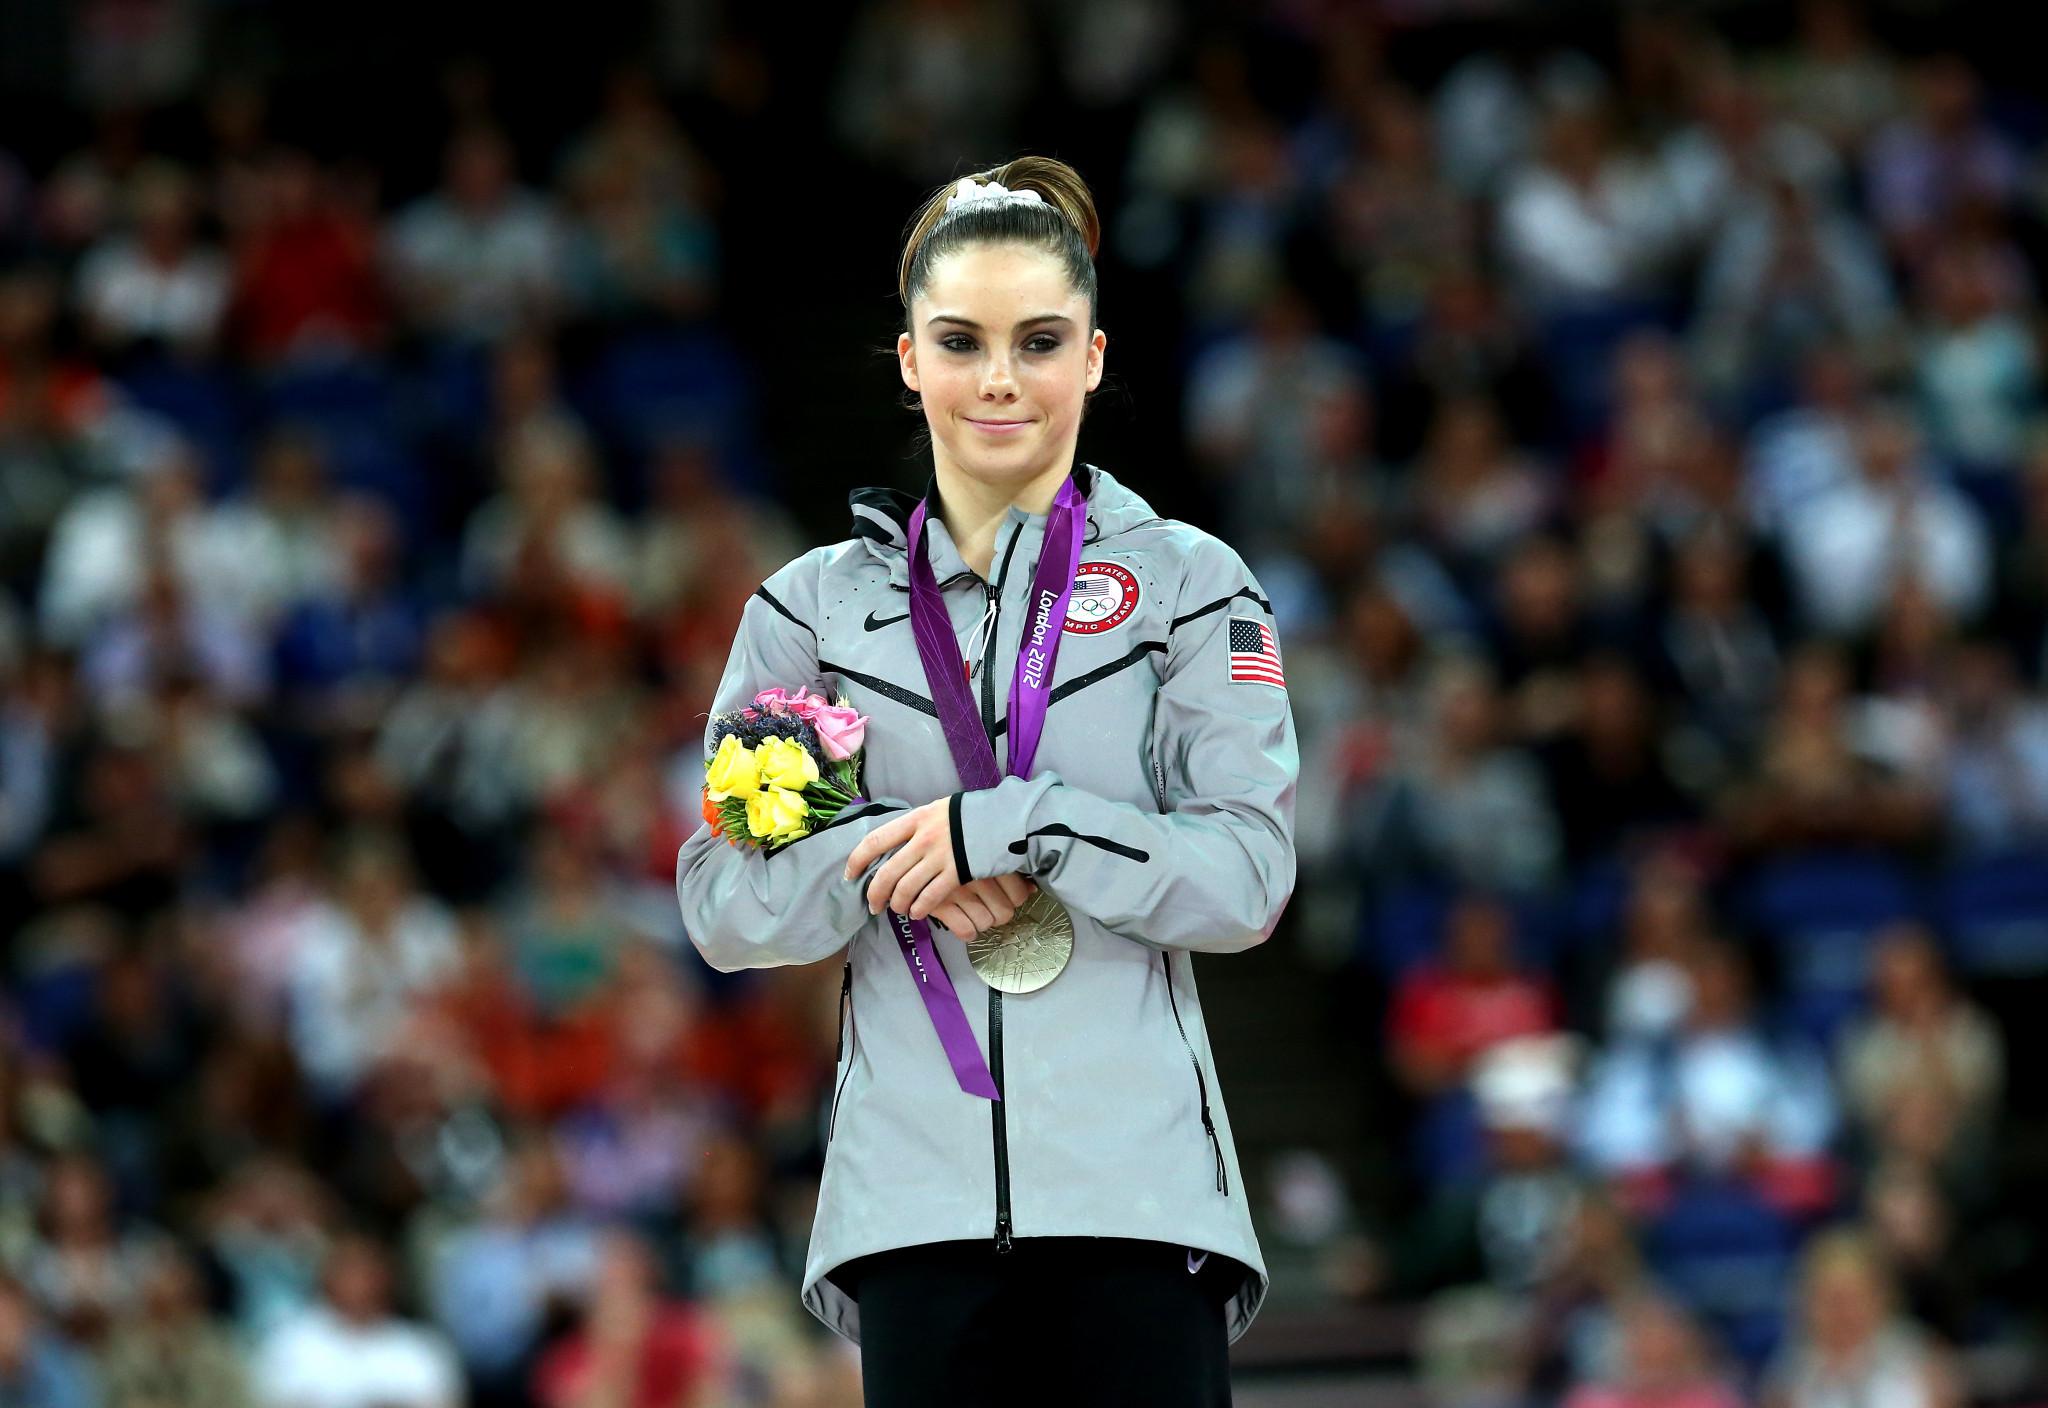 London 2012 champion becomes latest gymnast to make abuse accusations against doctor